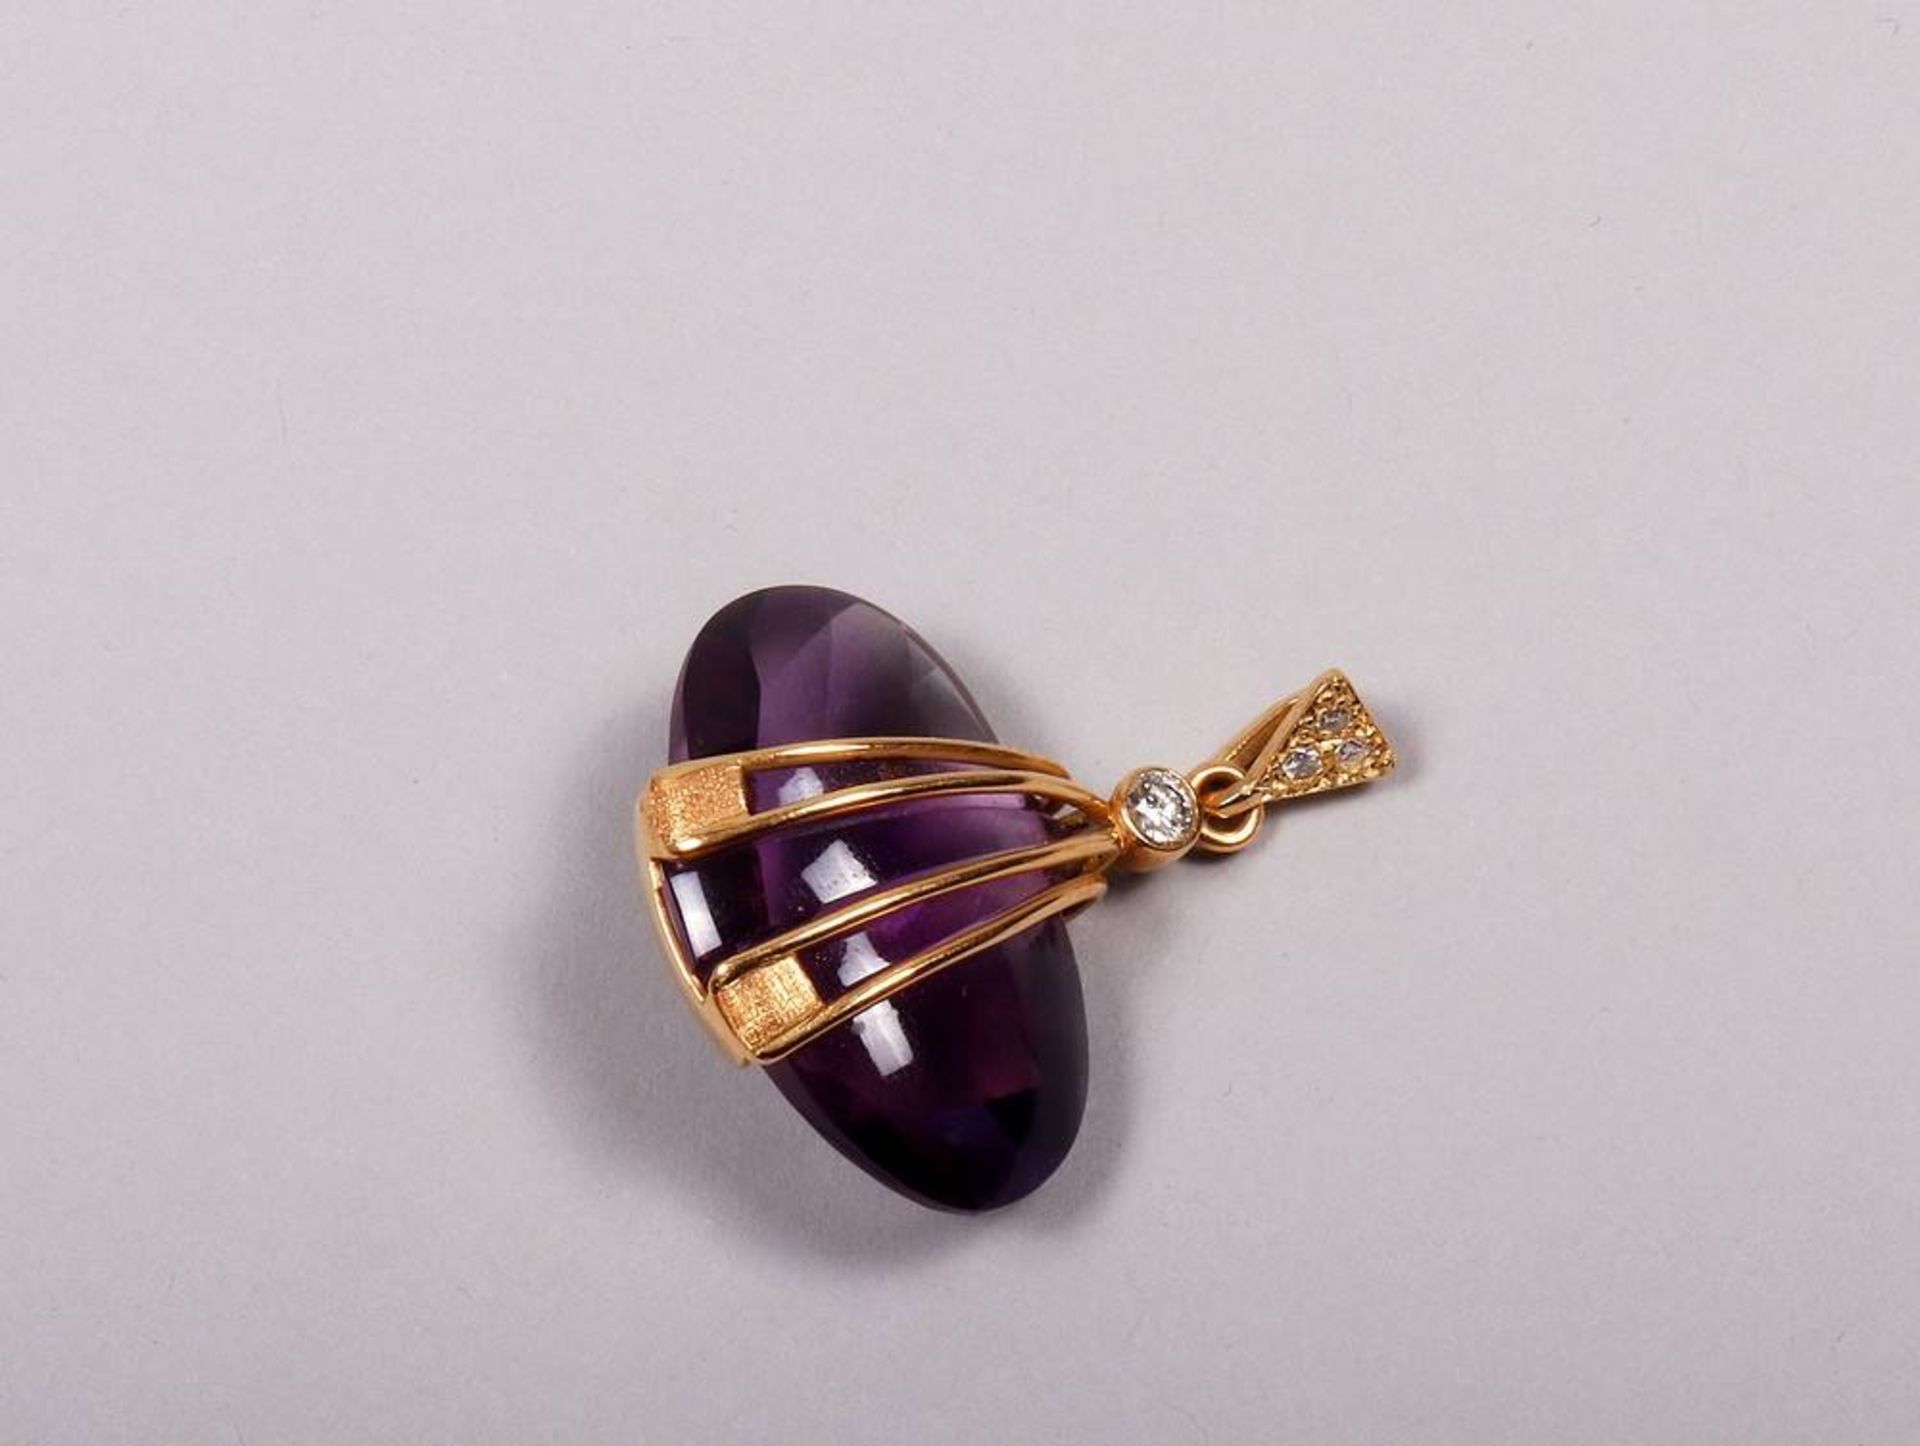 Pendant750 gold, ovaler, set with facetted amethyst and 2 brilliant cut diamonds and 2 diamonds 8/